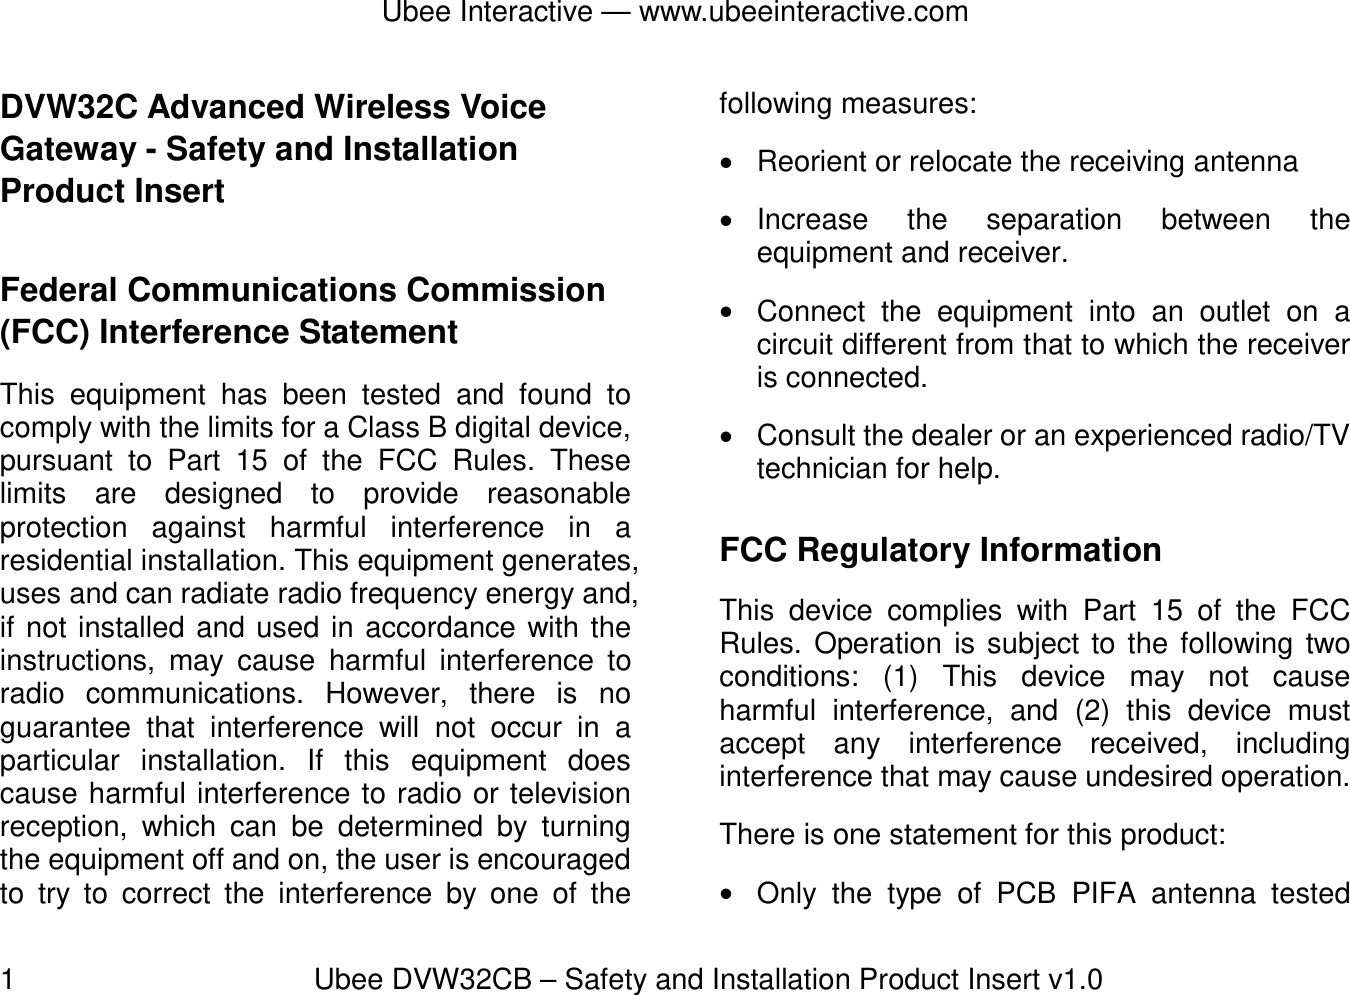 Ubee Interactive — www.ubeeinteractive.com 1          Ubee DVW32CB – Safety and Installation Product Insert v1.0 DVW32C Advanced Wireless Voice Gateway - Safety and Installation Product Insert   Federal Communications Commission (FCC) Interference Statement This equipment has been tested and found to comply with the limits for a Class B digital device, pursuant to Part 15 of the FCC Rules. These limits are designed to provide reasonable protection against harmful interference in a residential installation. This equipment generates, uses and can radiate radio frequency energy and, if not installed and used in accordance with the instructions, may cause harmful interference to radio communications. However, there is no guarantee that interference will not occur in a particular installation. If this equipment does cause harmful interference to radio or television reception, which can be determined by turning the equipment off and on, the user is encouraged to try to correct the interference by one of the following measures:  Reorient or relocate the receiving antenna  Increase the separation between the equipment and receiver.  Connect the equipment into an outlet on a circuit different from that to which the receiver is connected.    Consult the dealer or an experienced radio/TV technician for help. FCC Regulatory Information This device complies with Part 15 of the FCC Rules. Operation is subject to the following two conditions: (1) This device may not cause harmful interference, and (2) this device must accept any interference received, including interference that may cause undesired operation. There is one statement for this product:    Only the type of PCB PIFA antenna tested 